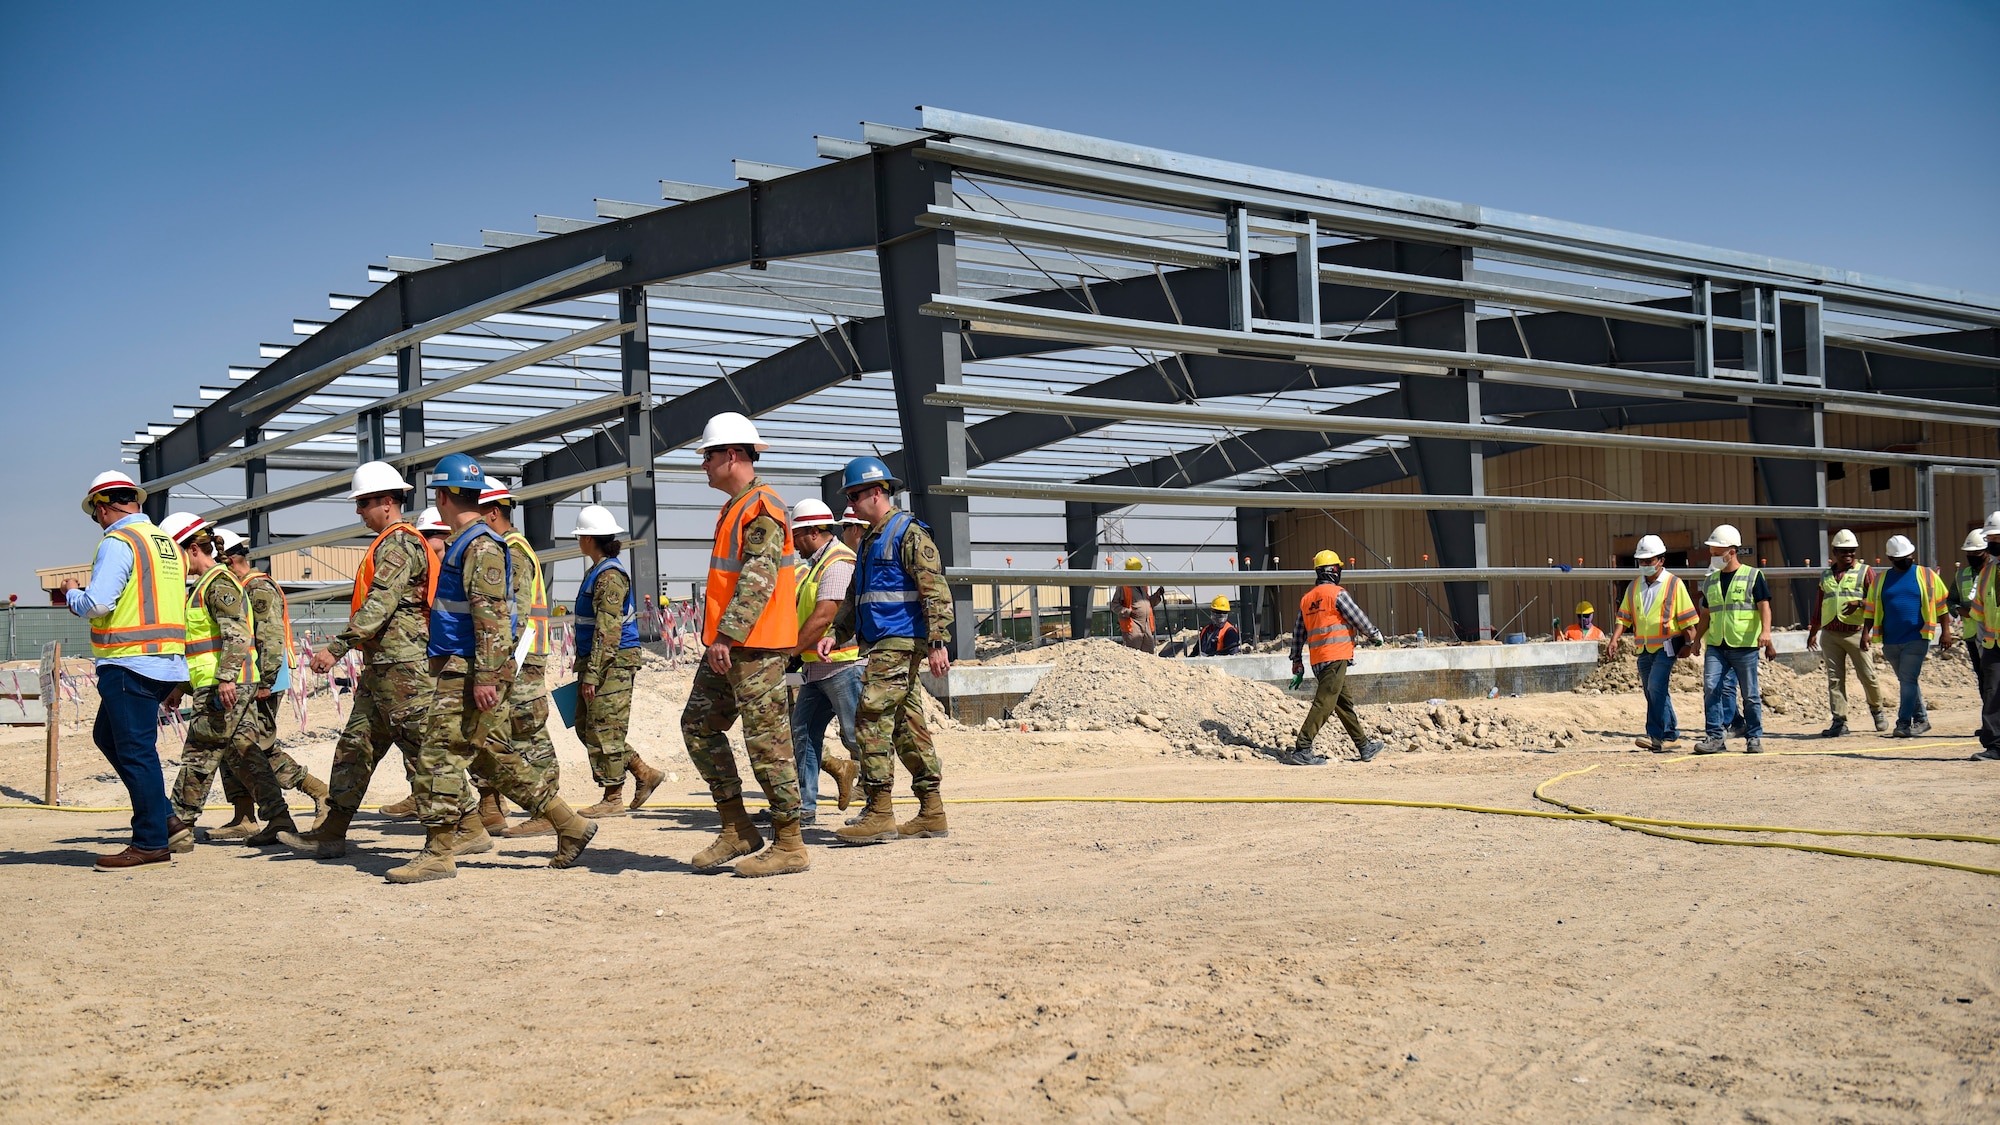 U.S. Army Maj. Gen. Kimberly Colloton, commanding general of the U.S. Army Corps of Engineers Transatlantic Division, takes a tour of the construction area of a new dining facility with Ali Al Salem Air Base leadership and USACE at ASAB, Kuwait, Oct. 21, 2021. It’s a priority of the 386th Air Expeditionary Wing to improve its installations and the quality of life of its Airmen. (U.S. Air Force photo by Staff Sgt. Ryan Brooks)